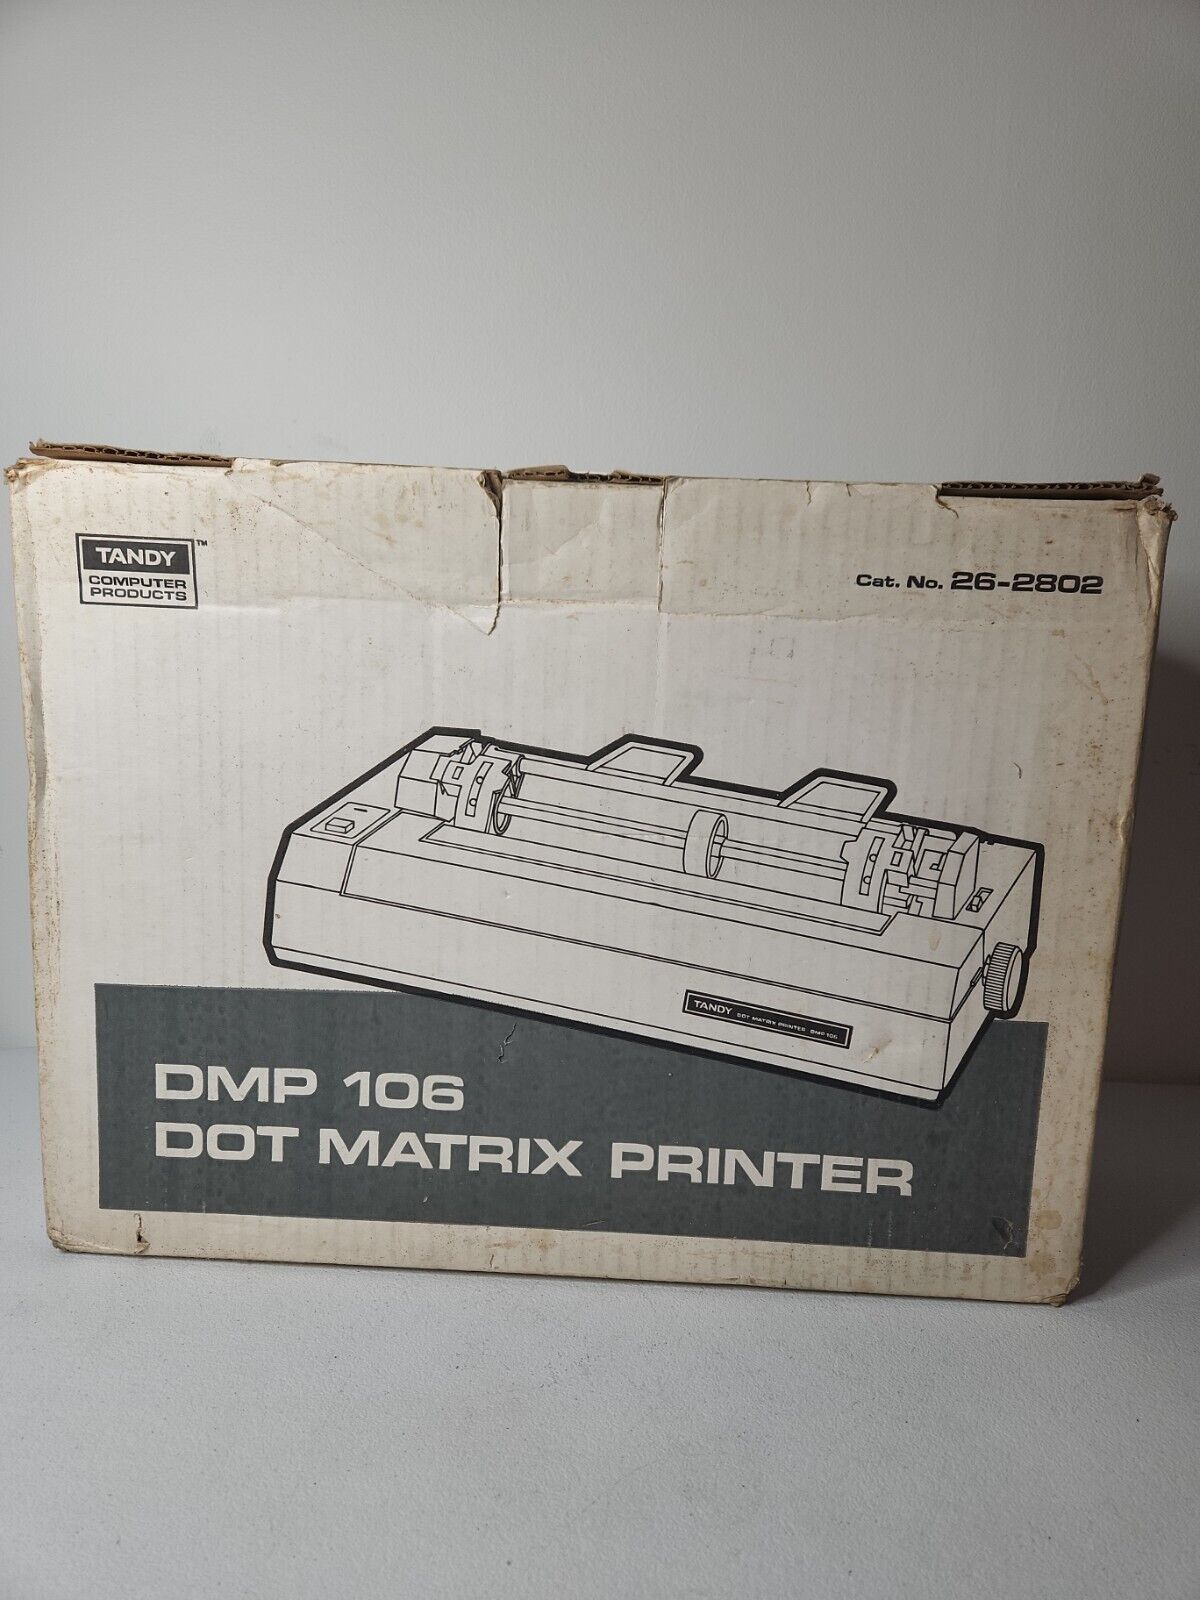 Tandy Dmp 106 Printer With Original Box POWERS ON MOVES Needs New Ribbon